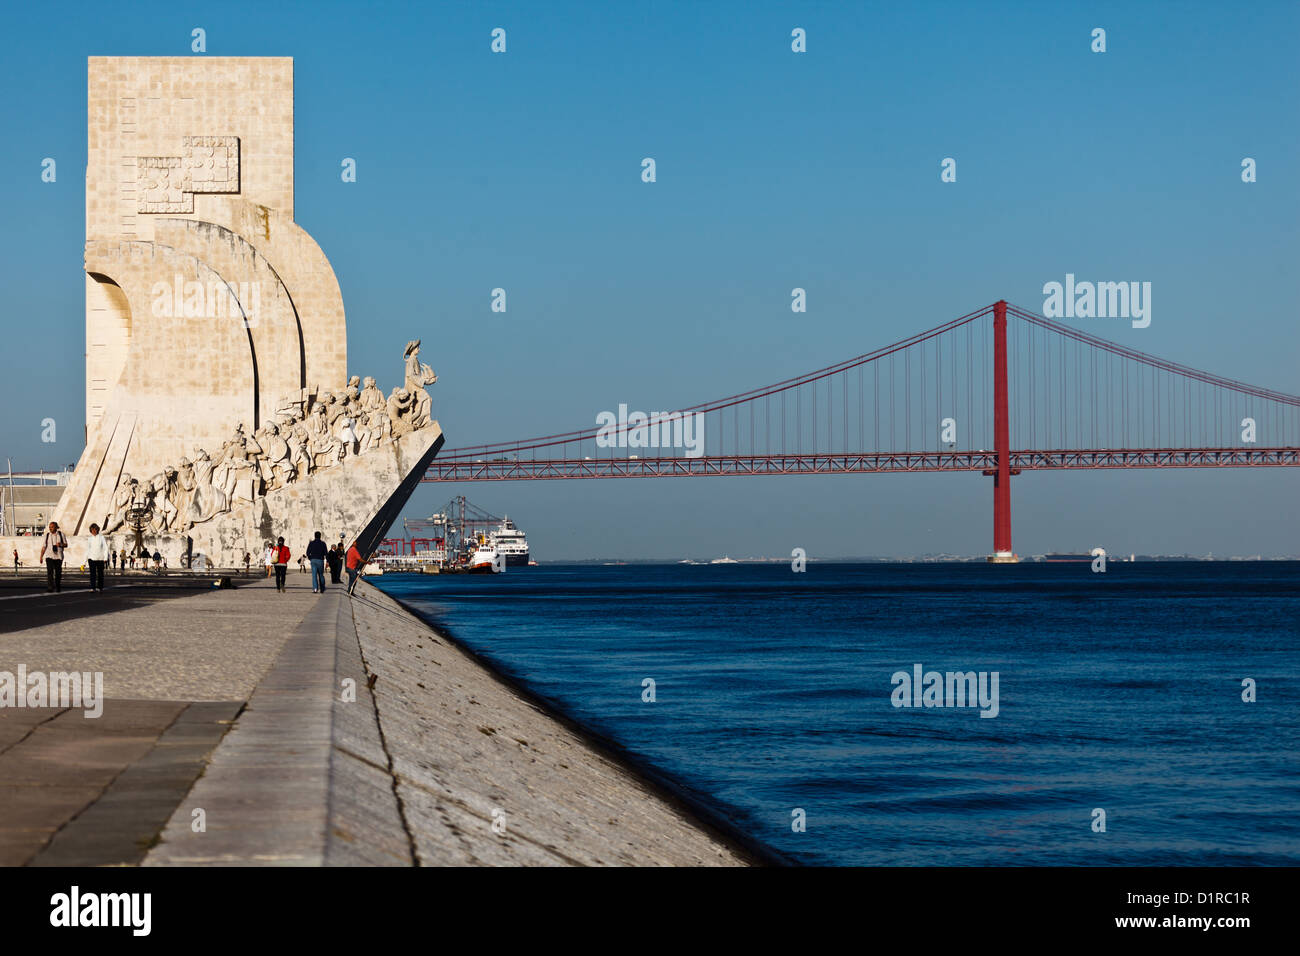 Wharf at harbor entrance with Monument to Discoveries and Lisbon's 25th of April Bridge crossing the Tagus river Stock Photo